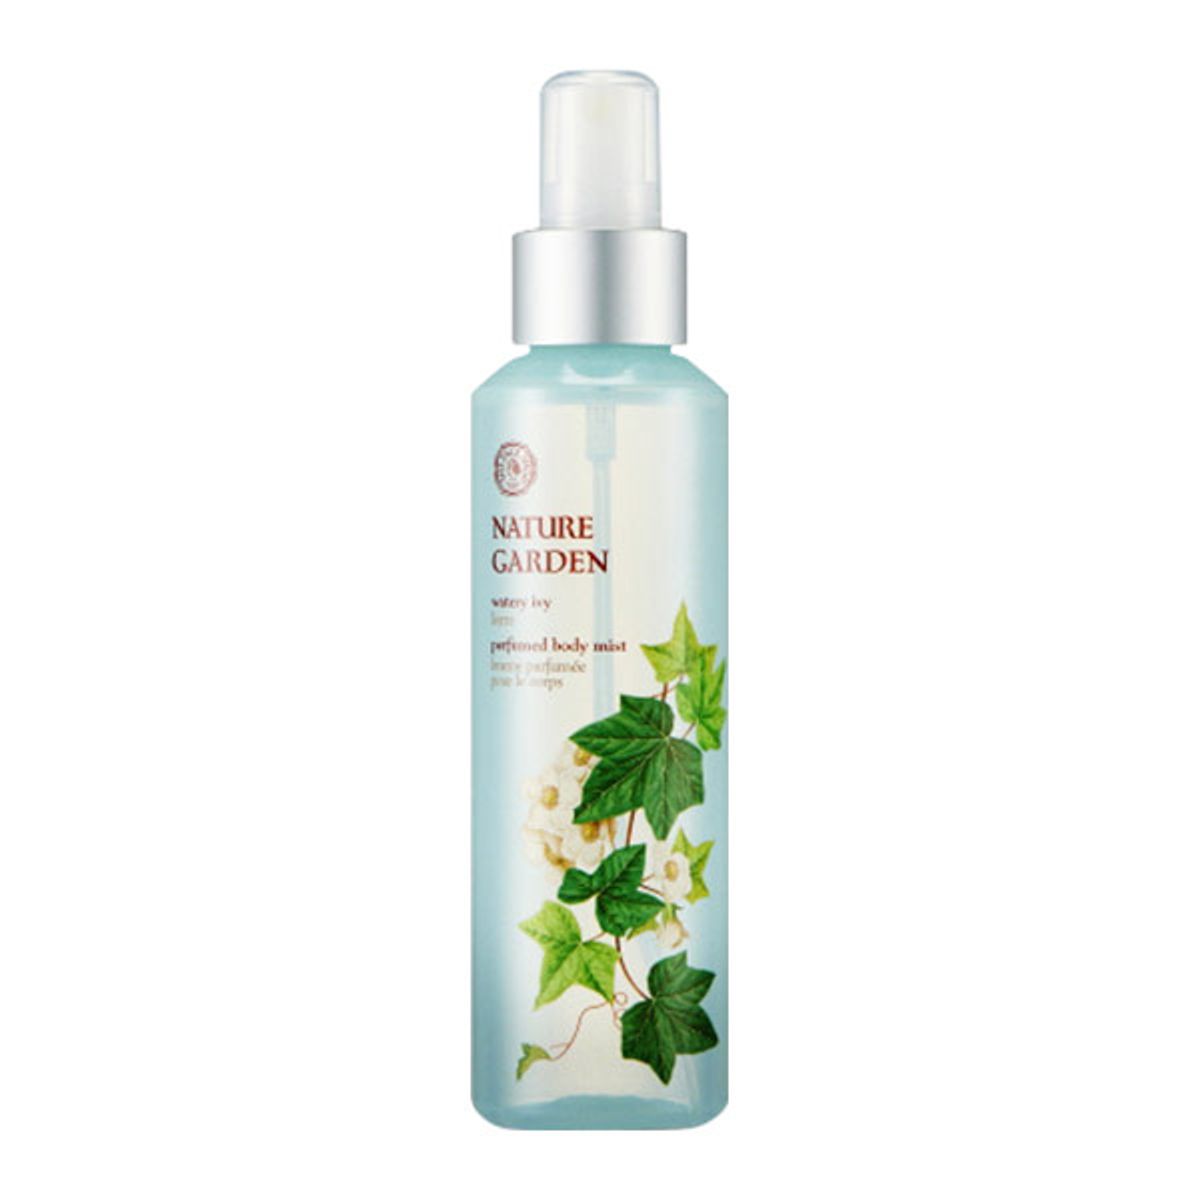 xit-duong-the-nature-garden-watery-ivy-perfumed-body-mist-1